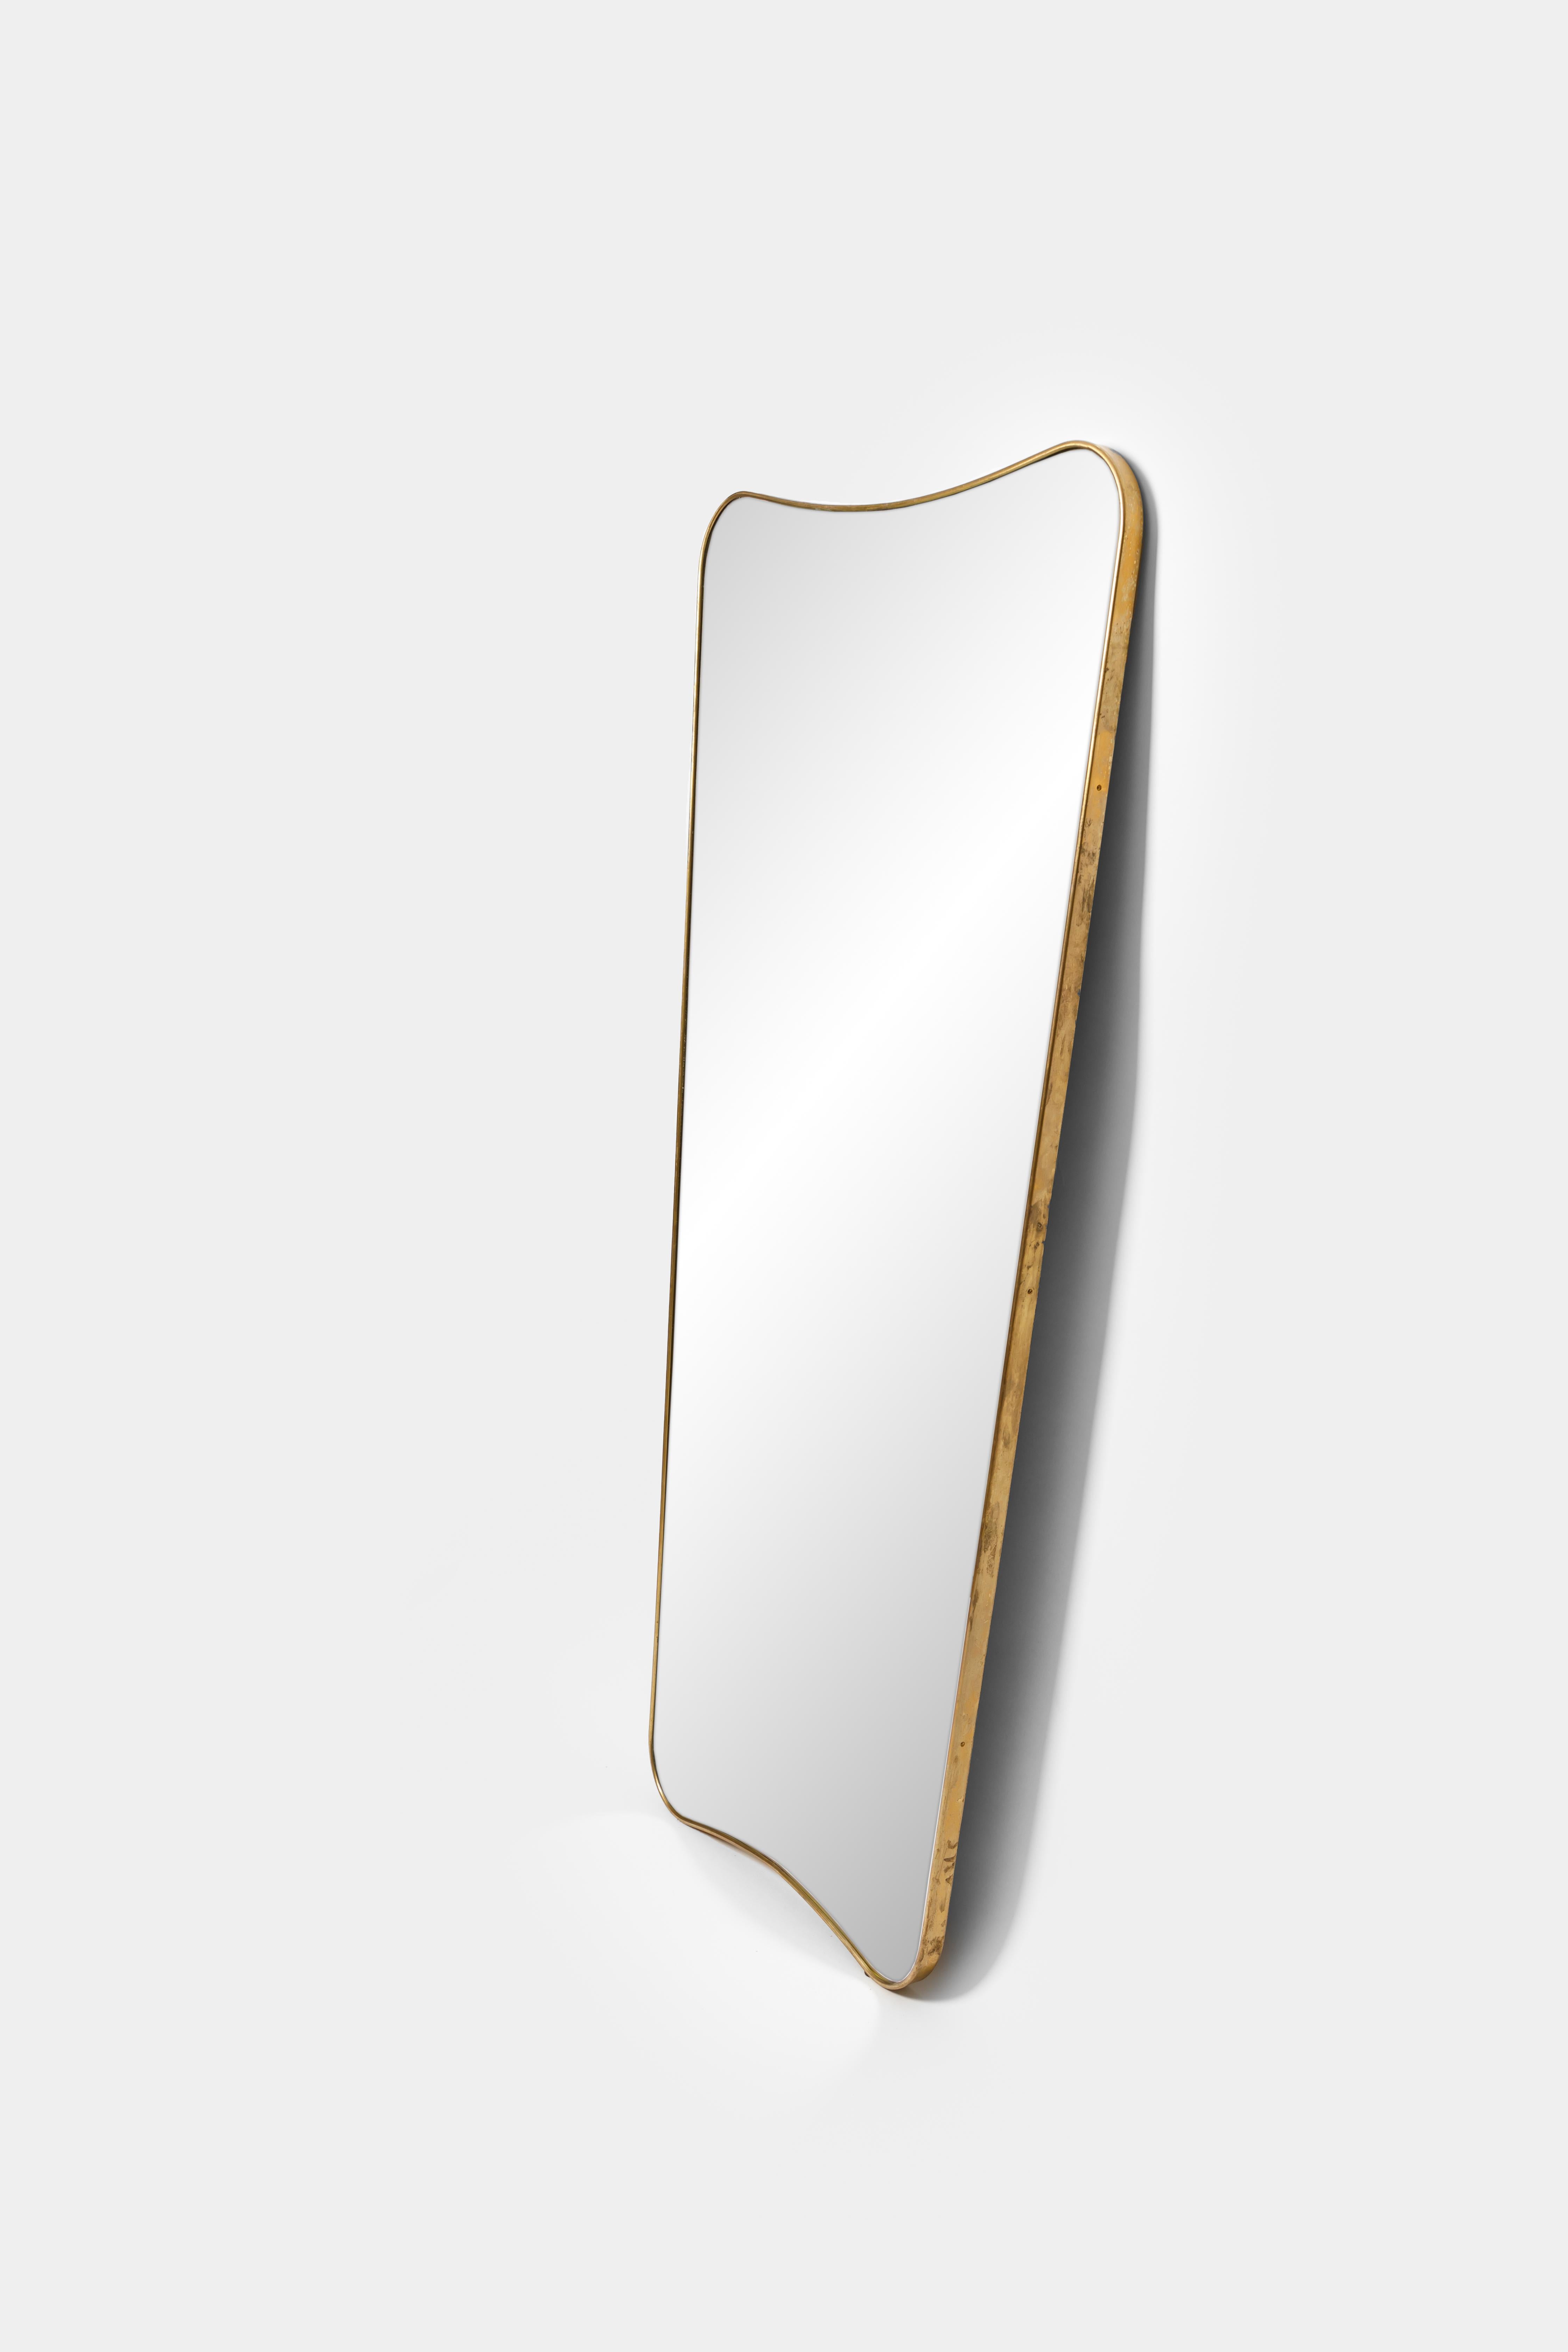 Elegant and large patinated gilt brass framed mirror with gently curved form in the style of Gio Ponti. Solid construction with wood backing.
  